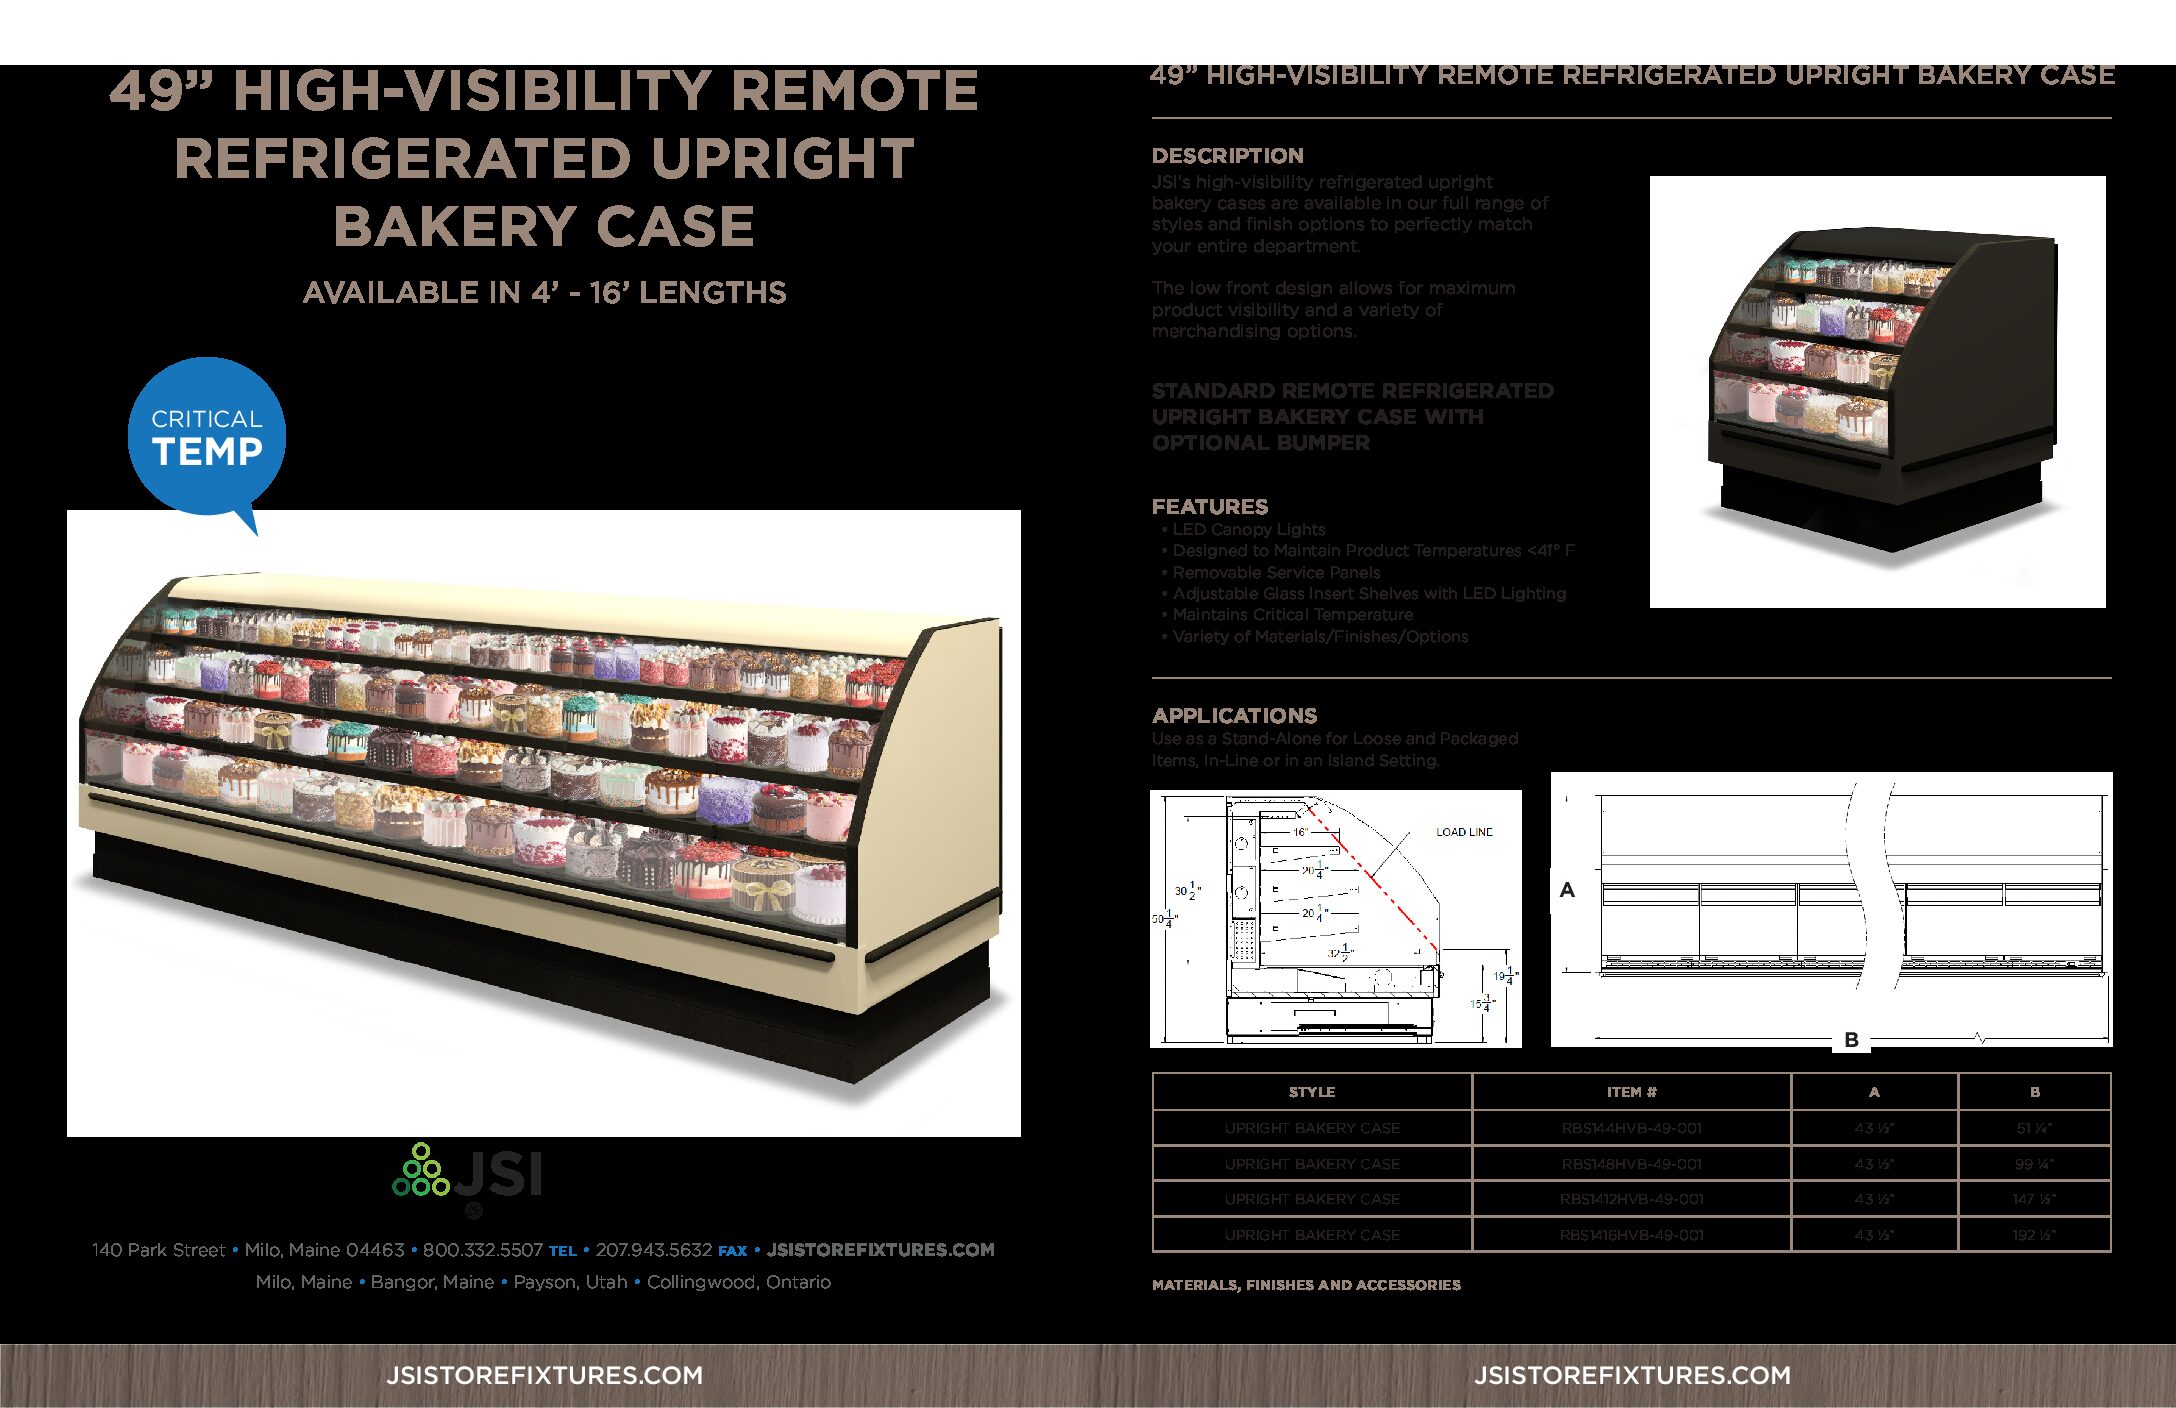 49” High-Visibility Remote Refrigerated Upright Bakery Case Spec Sheet (PDF)